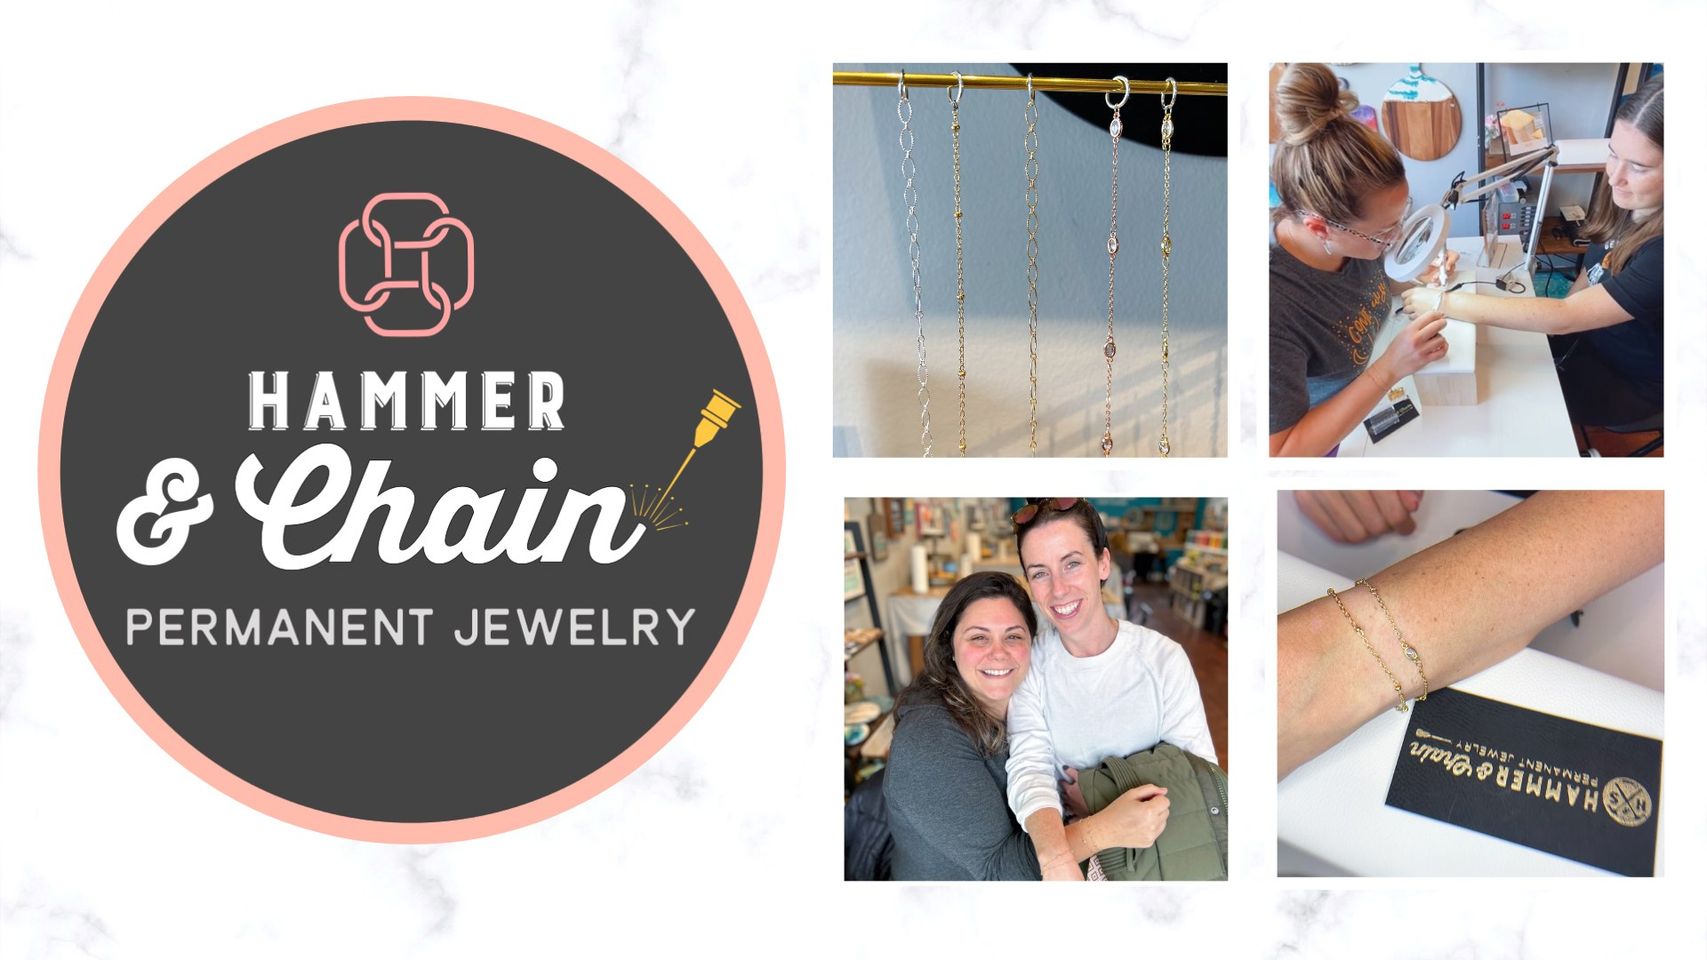 Creating a versatile collage that includes the "Hammer & Chain Permanent Jewelry" logo, a beautiful showcase of jewelry pieces, an image of a woman meticulously crafting jewelry, and a happy pair in a workshop. This visually engaging display is intended to highlight our unique products and passionate craftsmanship in an easy-to-understand, keyword-rich way aimed at boosting search engine optimization.